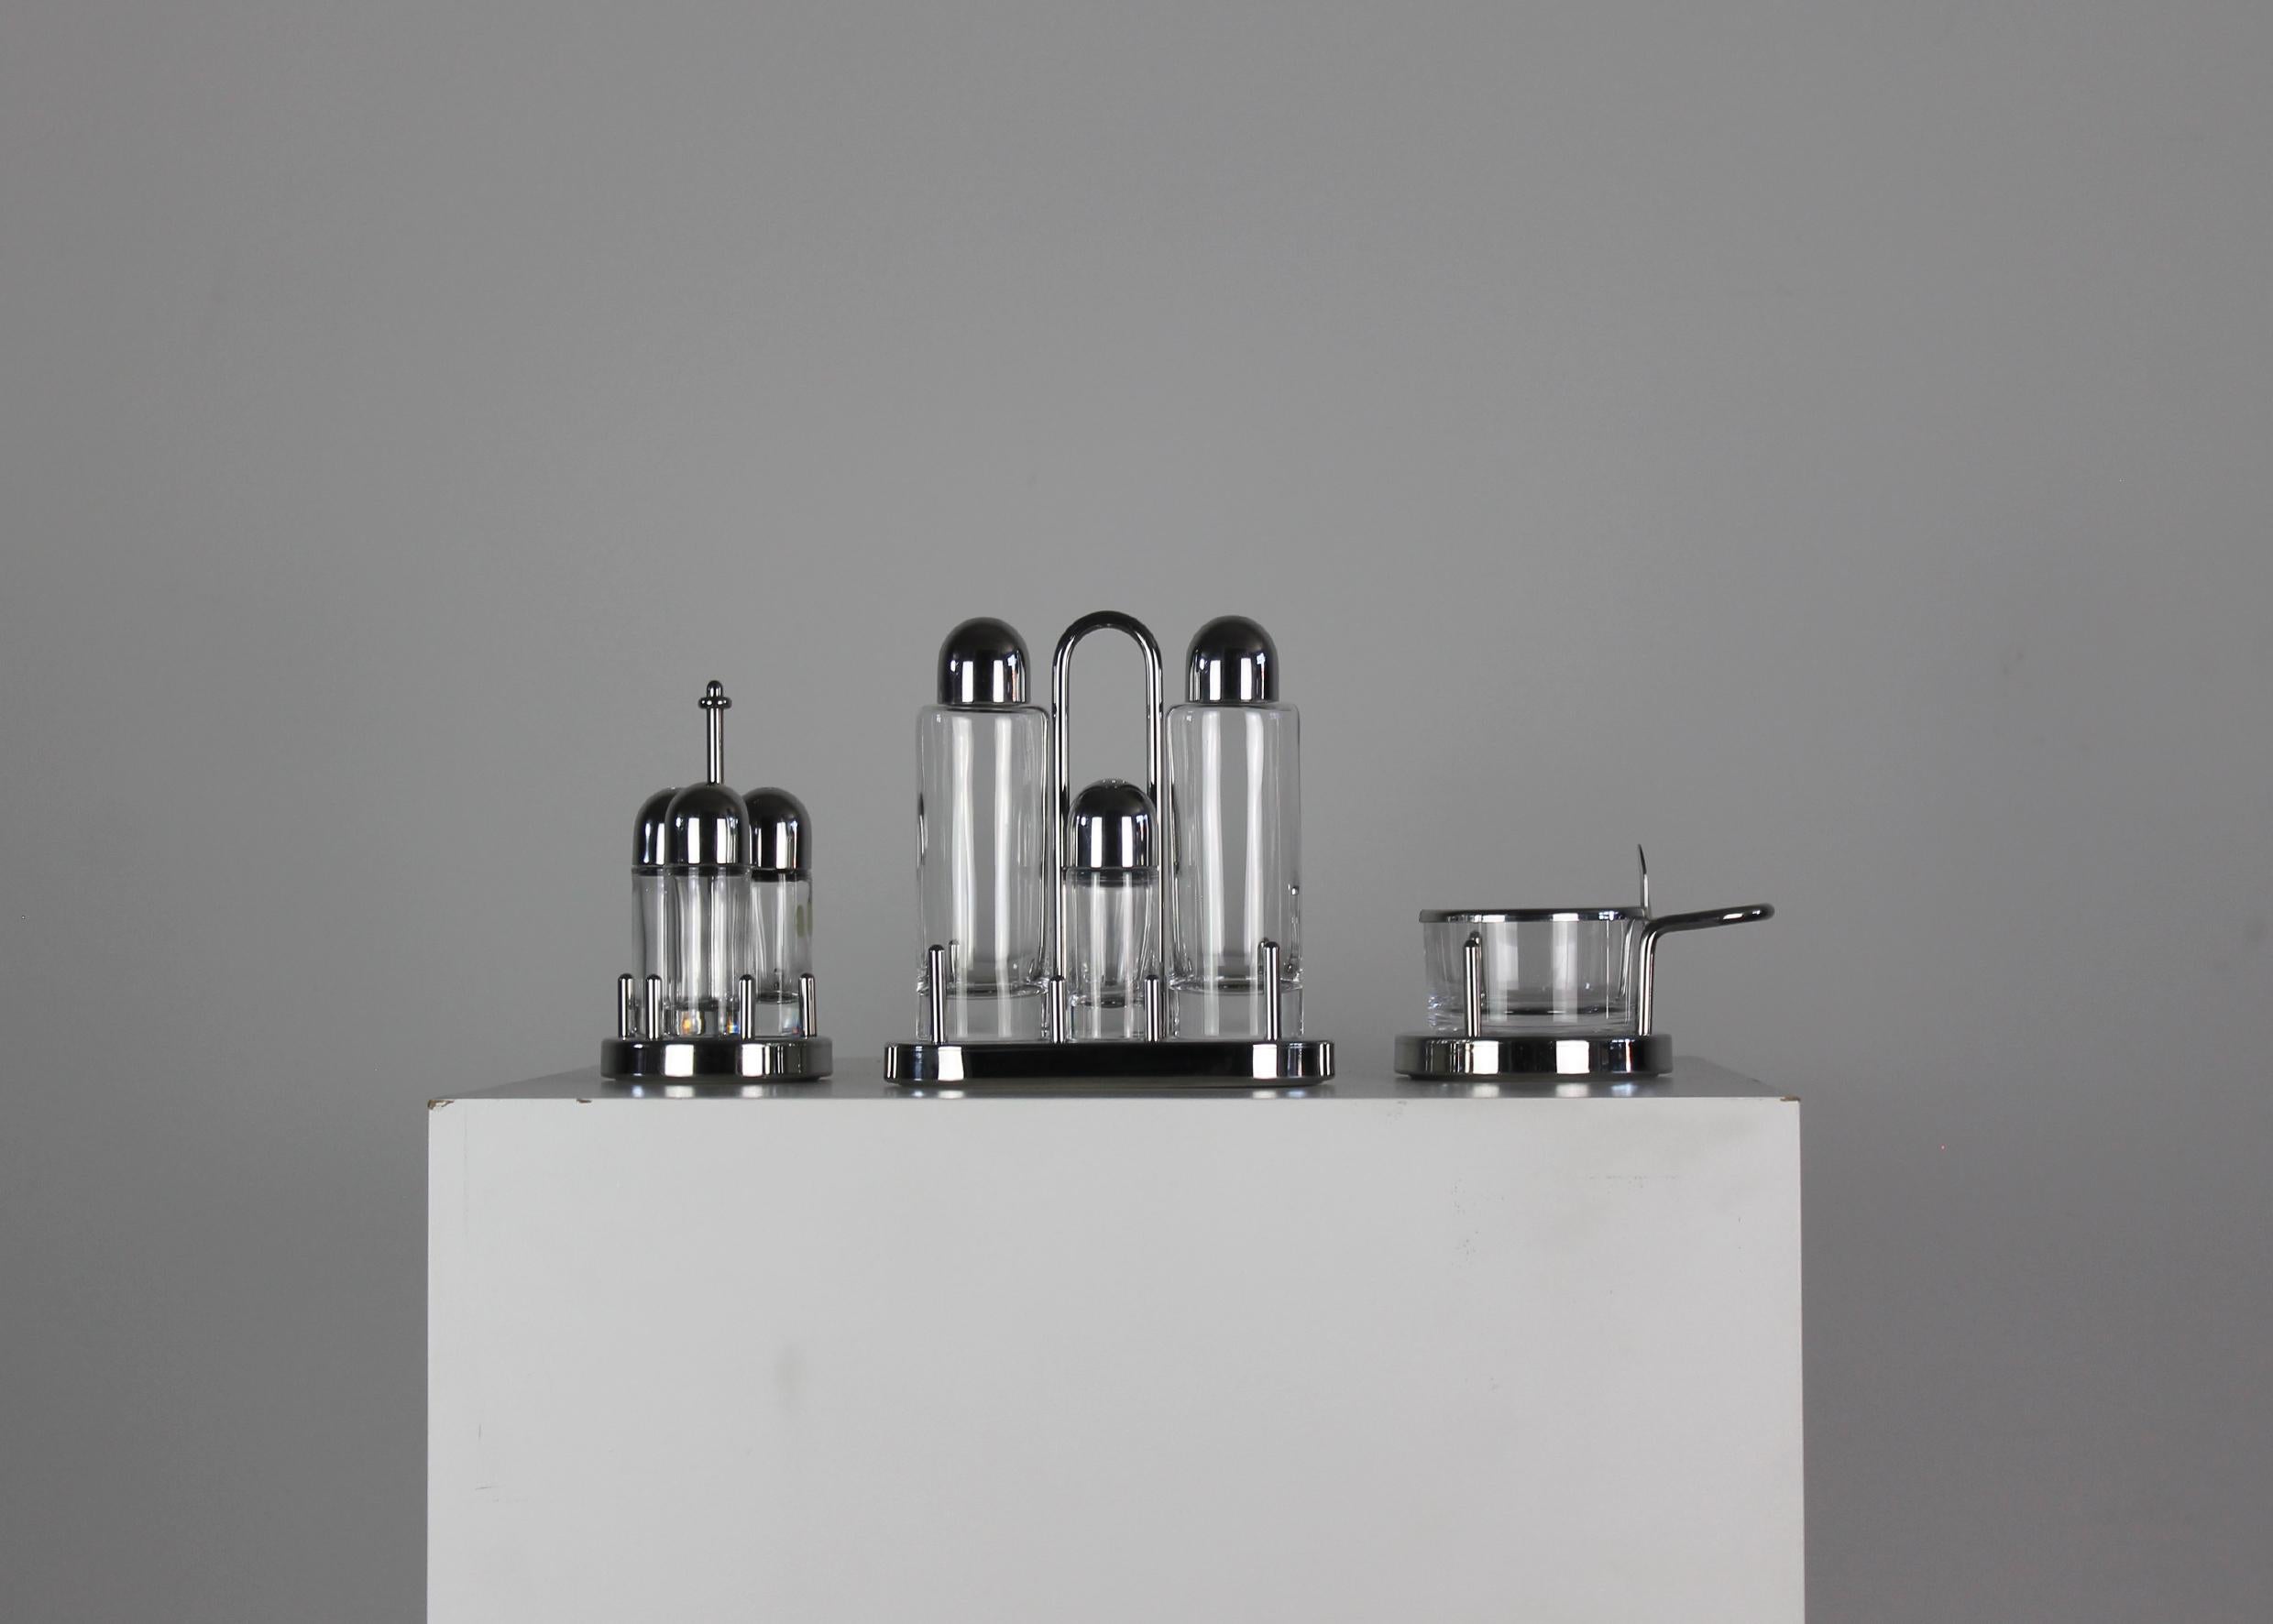 Cruet set composed of one complete set with an oil jug, vinegar jug, salt and pepper shaker, one set with three spices shakers, and a cheese pot, each piece was realized in glass and stainless steel.

This cruet set was designed by Ettore Sottsass